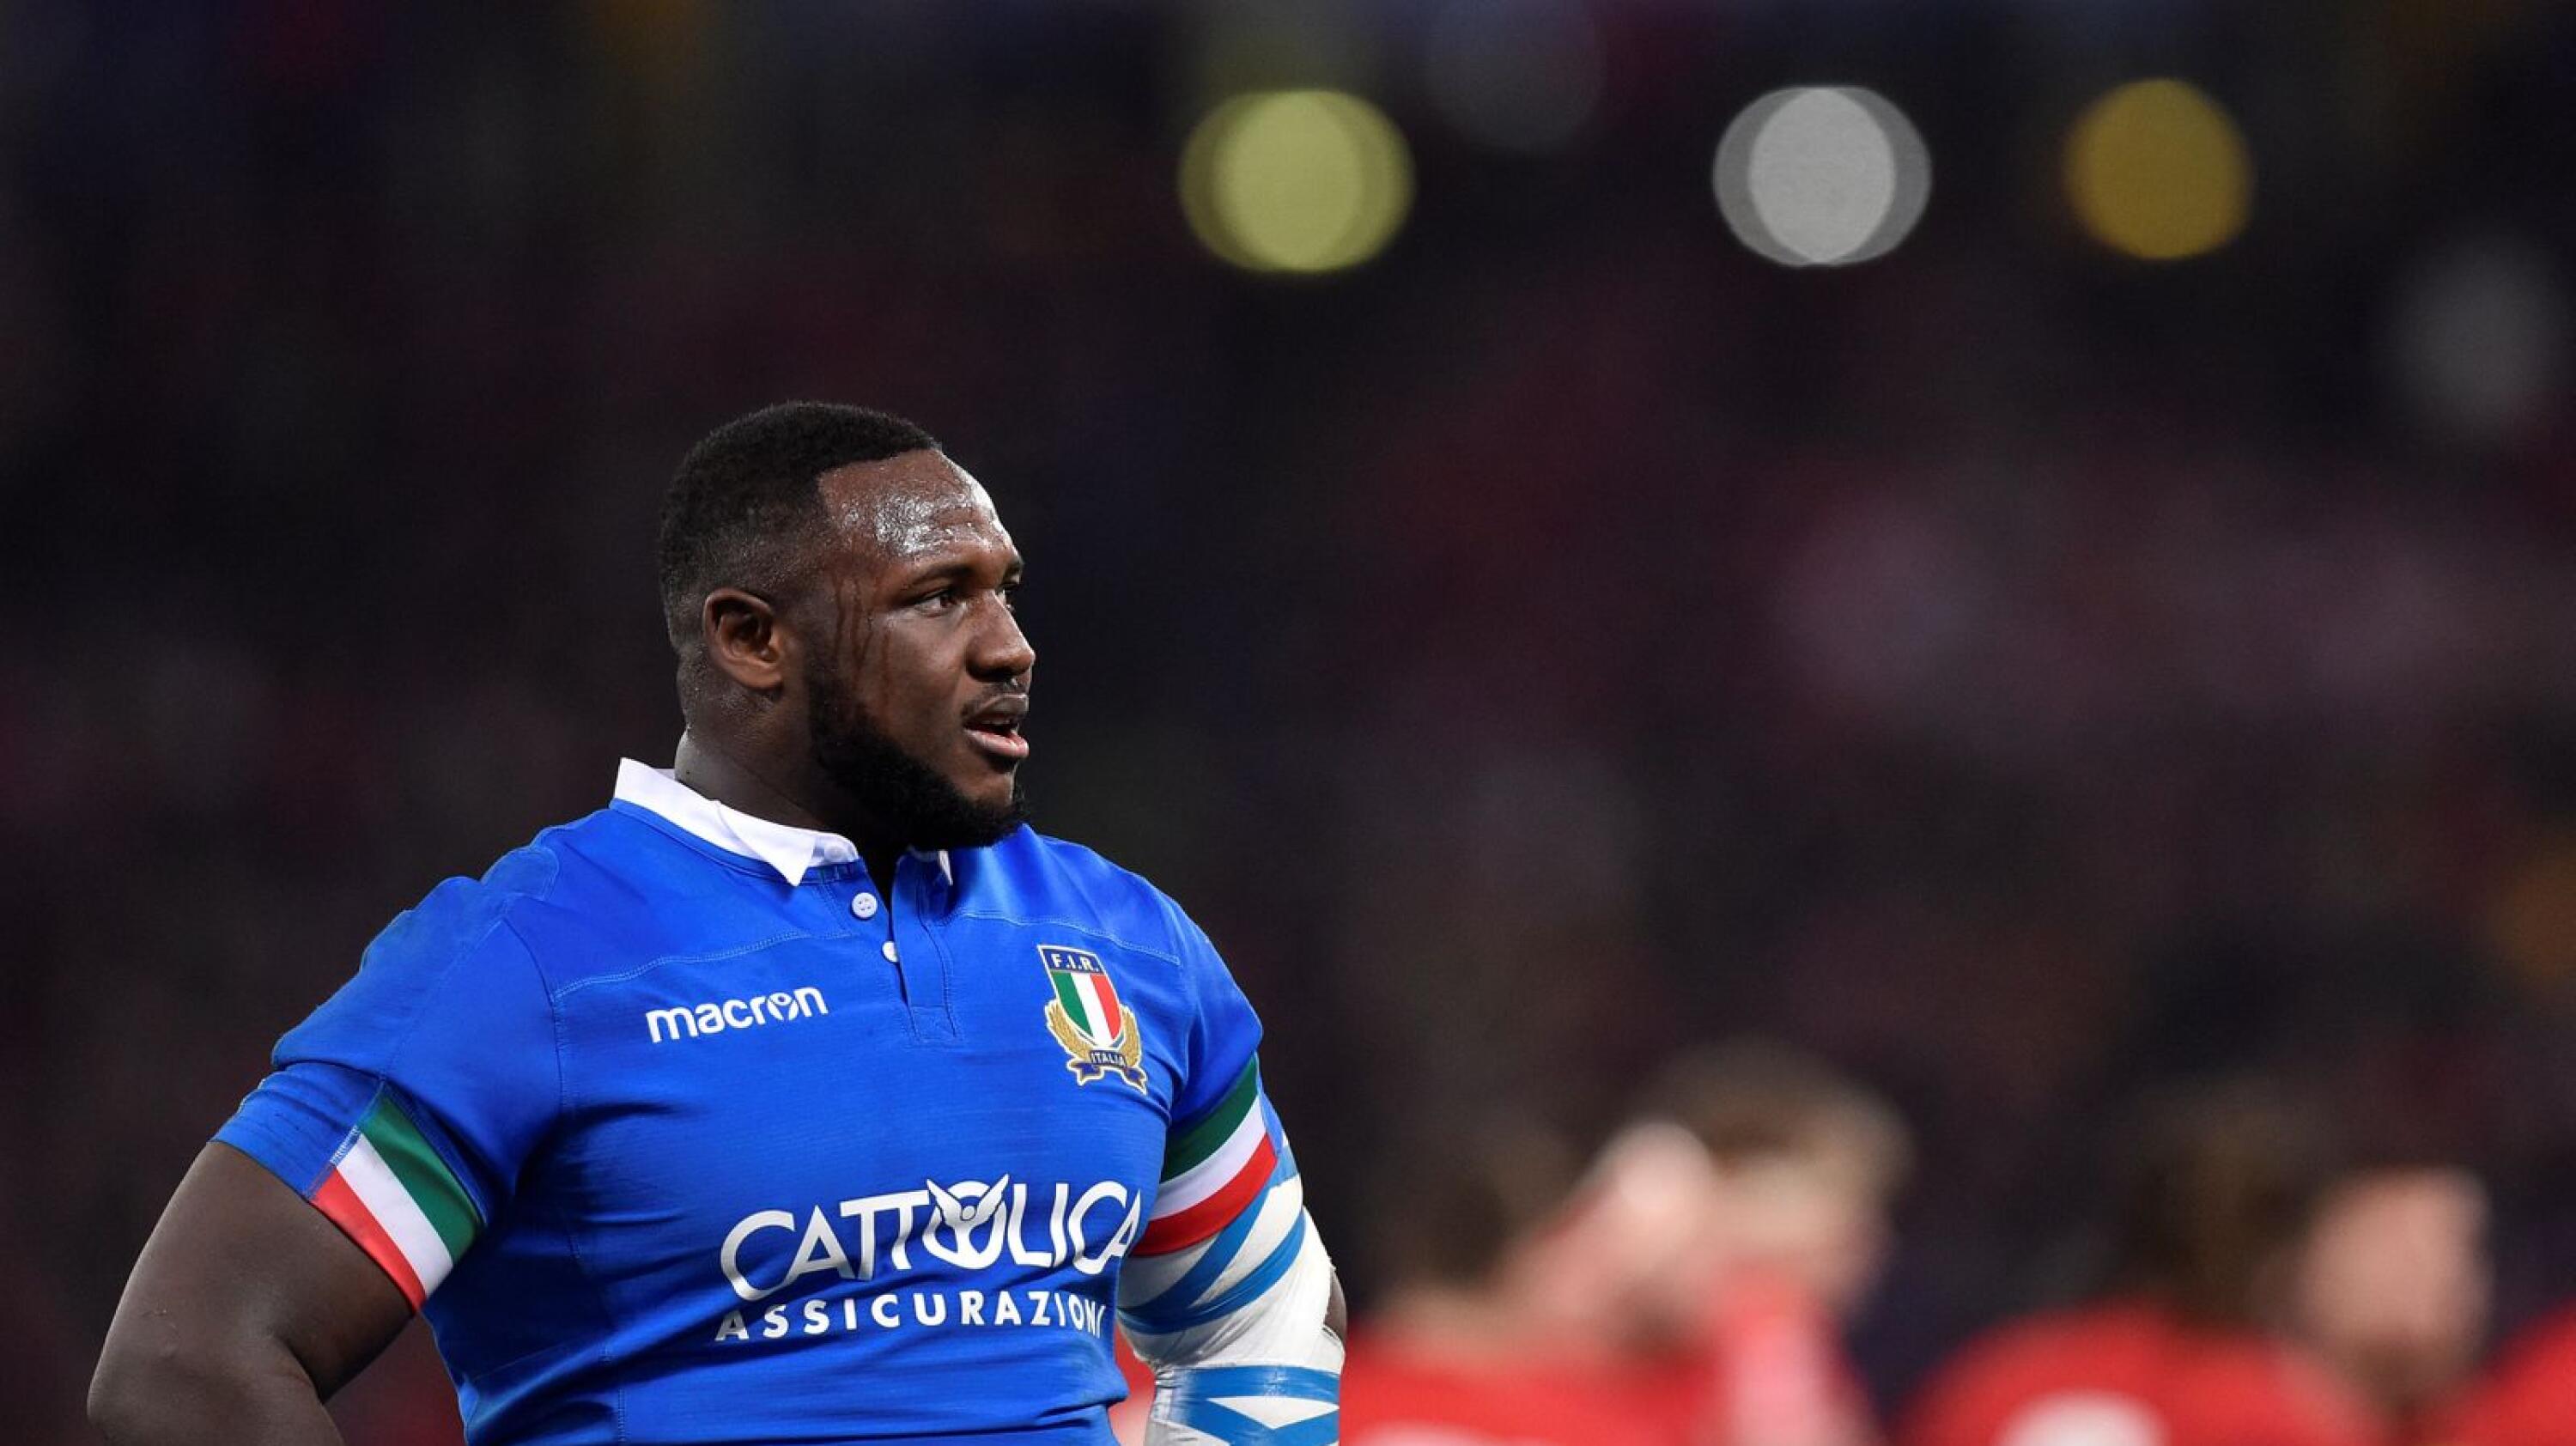 Cherif Traore plays as a prop for Benetton Treviso and the Italian national team